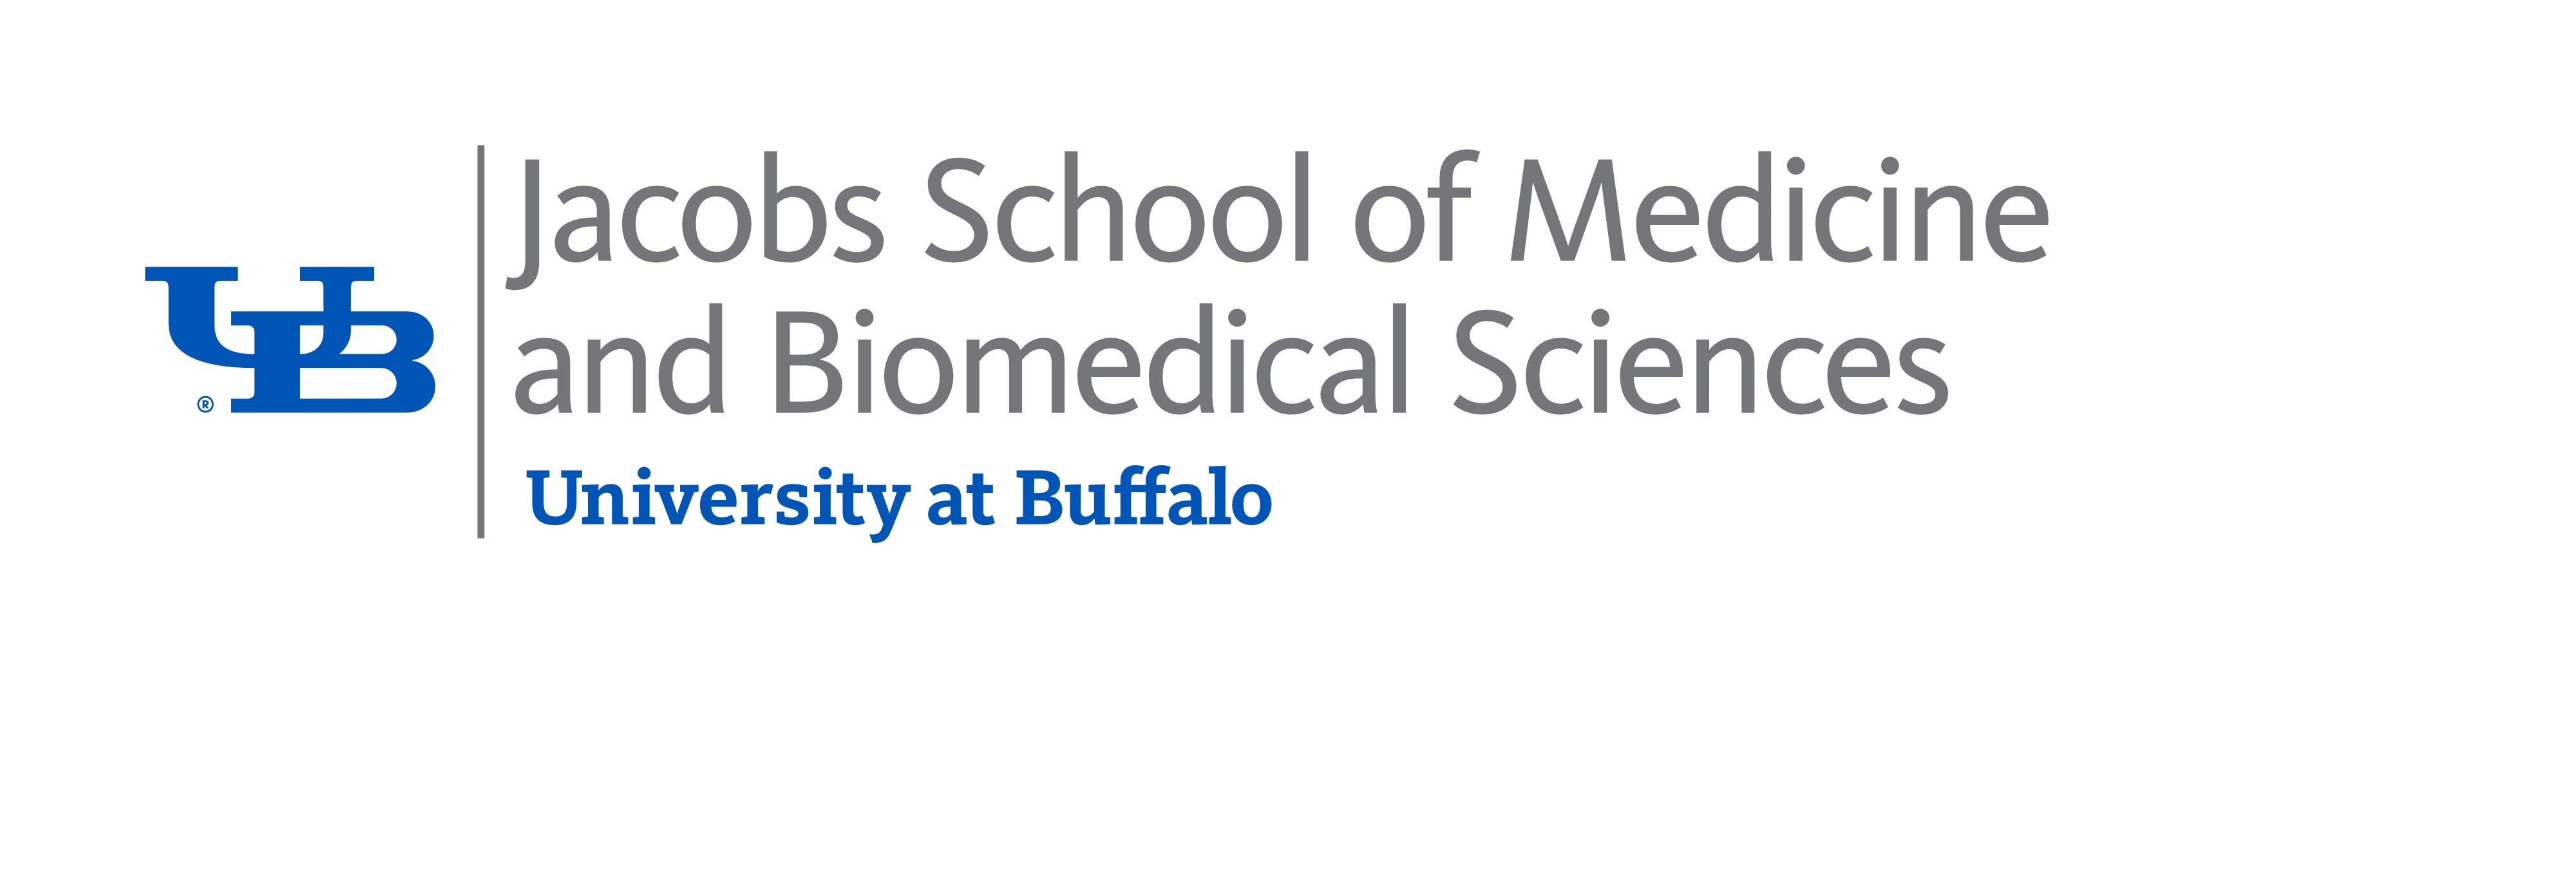 Jacobs School of Medicine and Biomedical Sciences University at Buffalo logo